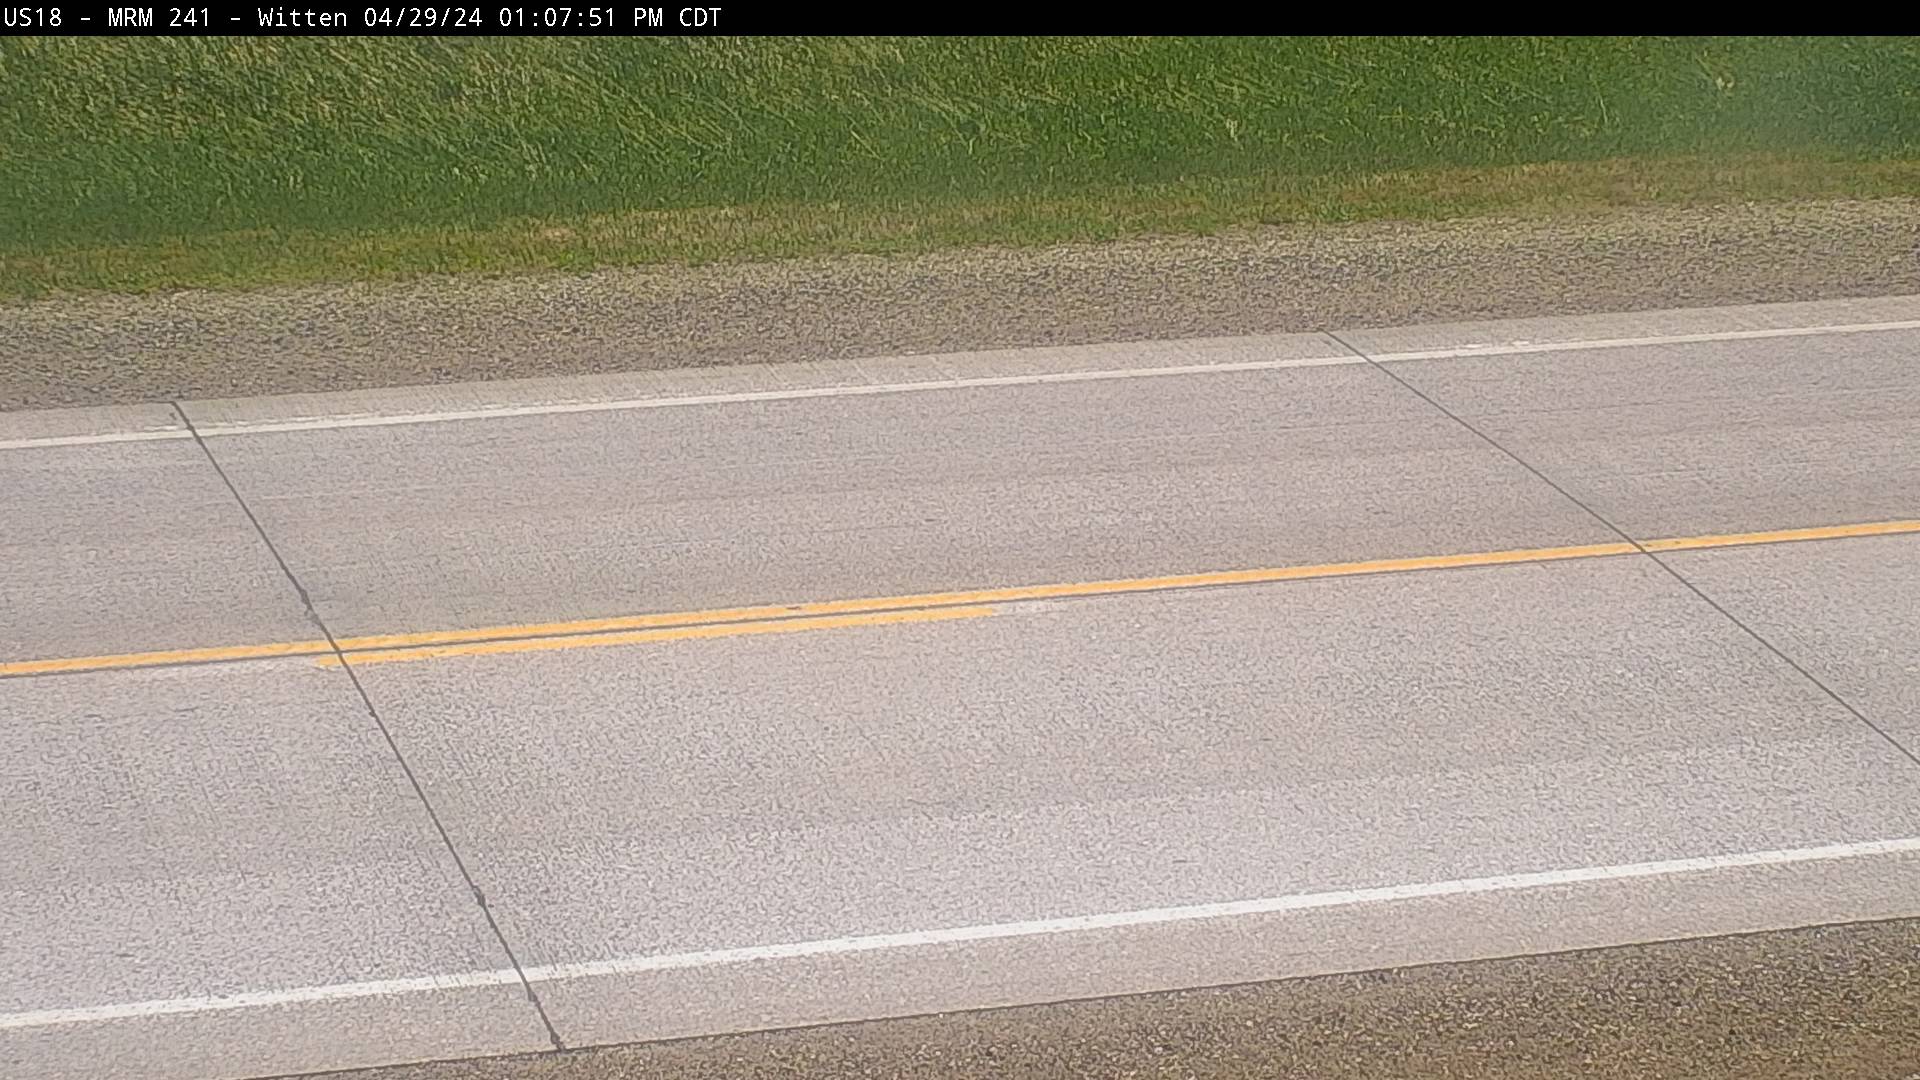 Traffic Cam 4 miles south of town along US-18 @ MP 241 - Southeast Player